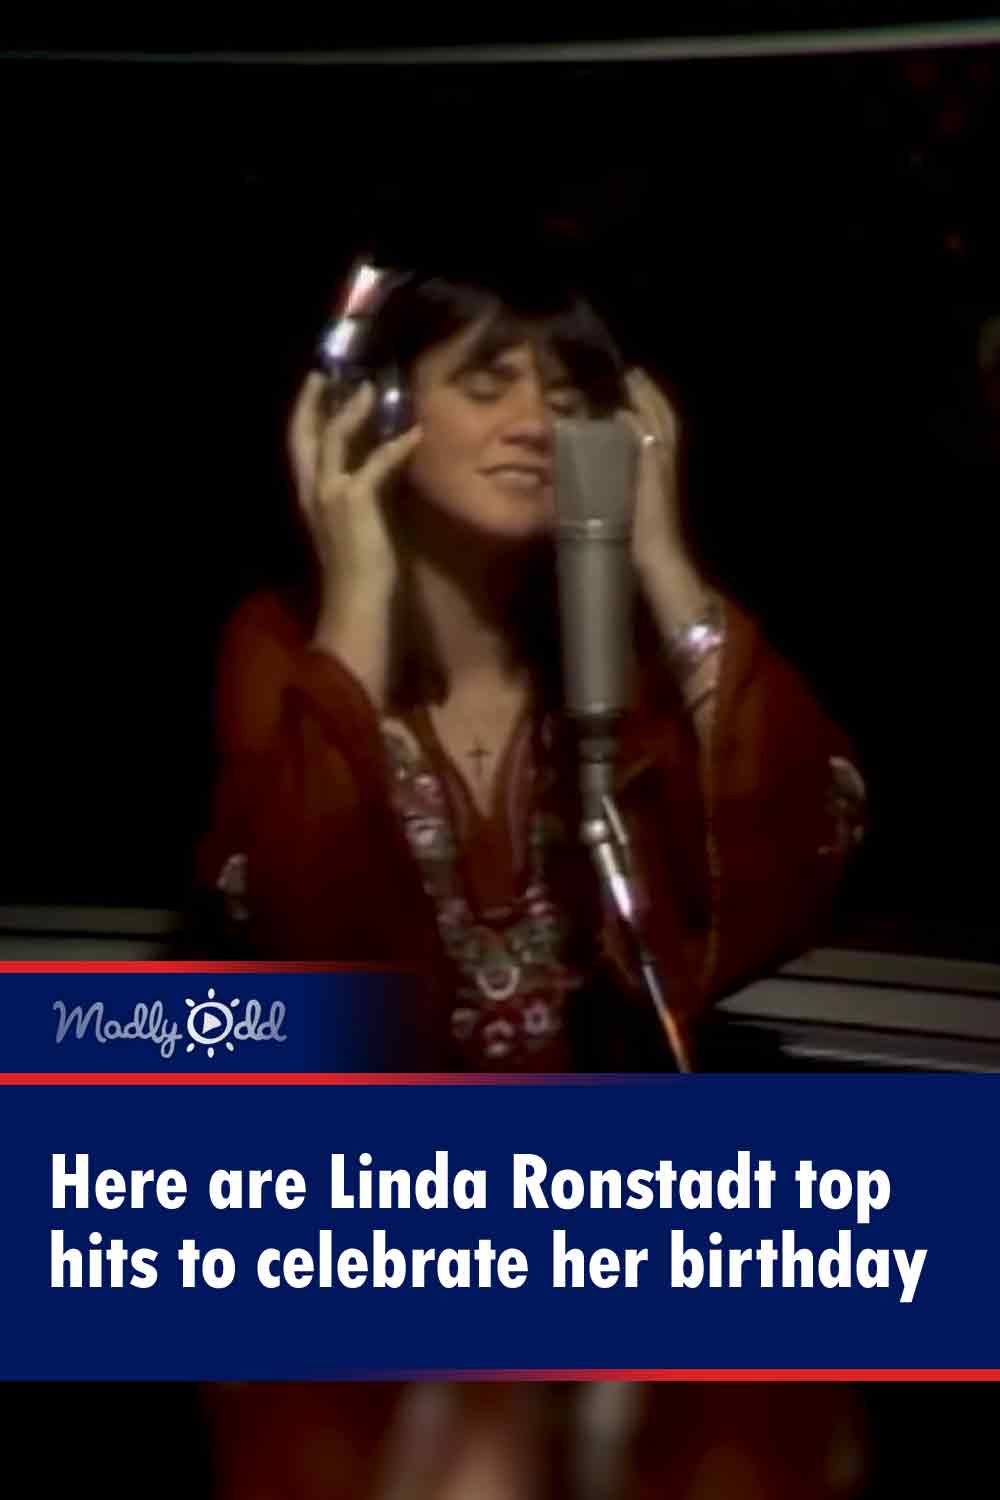 Here are Linda Ronstadt top hits to celebrate her birthday